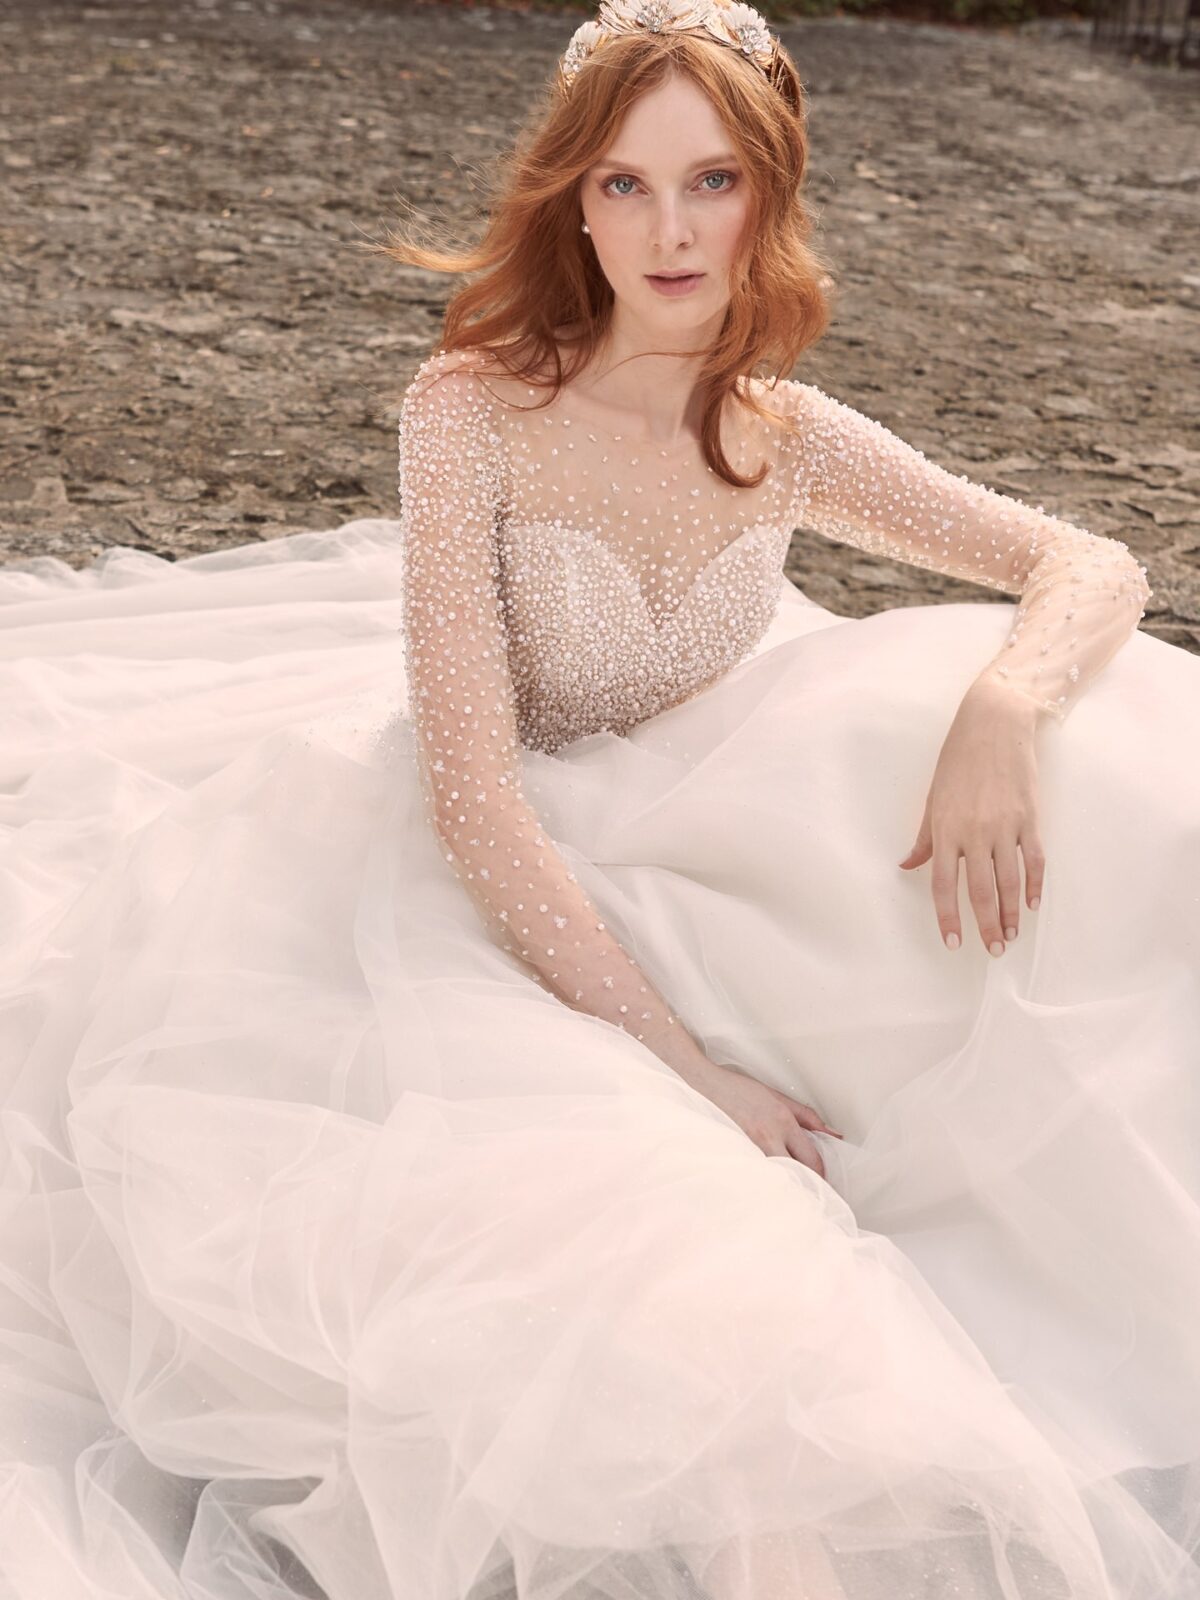 2022 Wedding Dress Trends Pearl Bridal Gown by Maggie Sottero